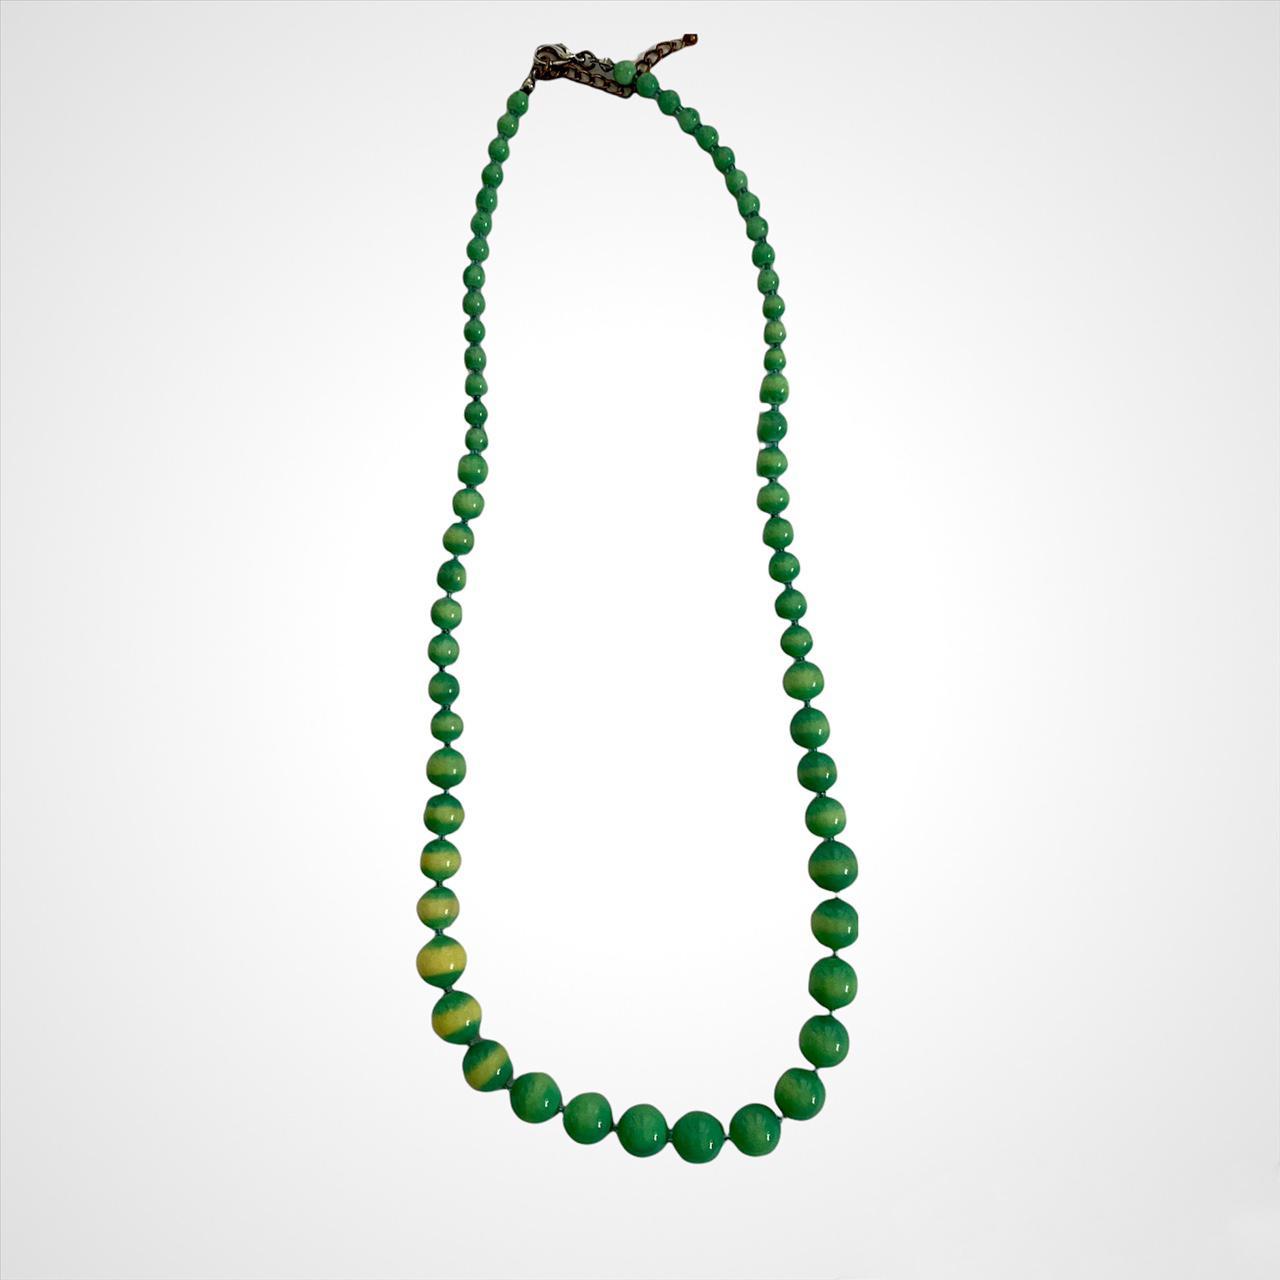 American Vintage Women's Green and Blue Jewellery